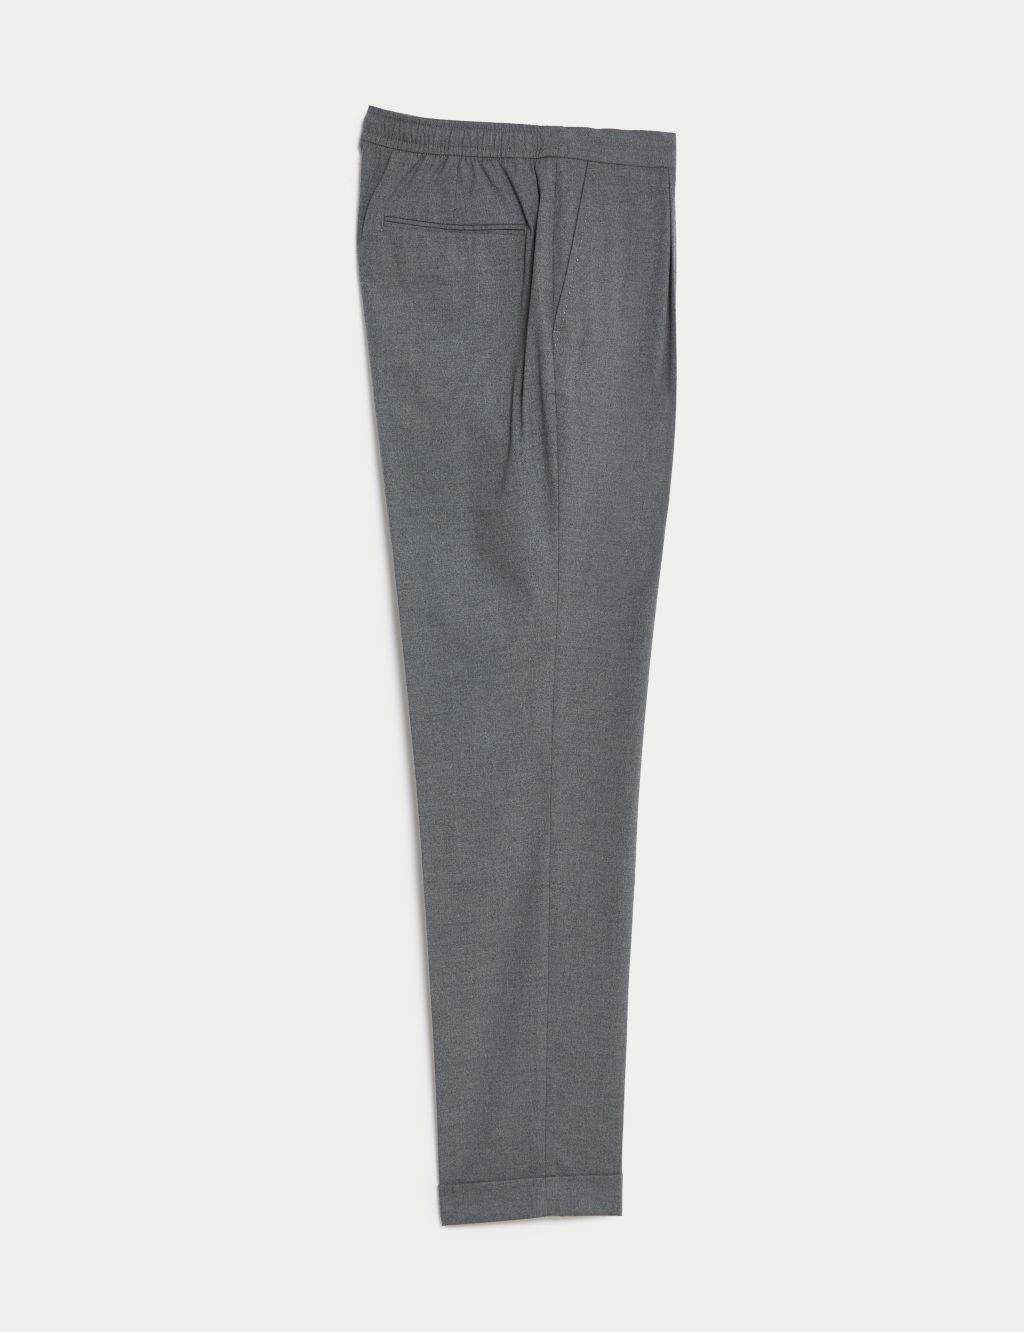 Single Pleat Brushed Stretch Trouser image 2